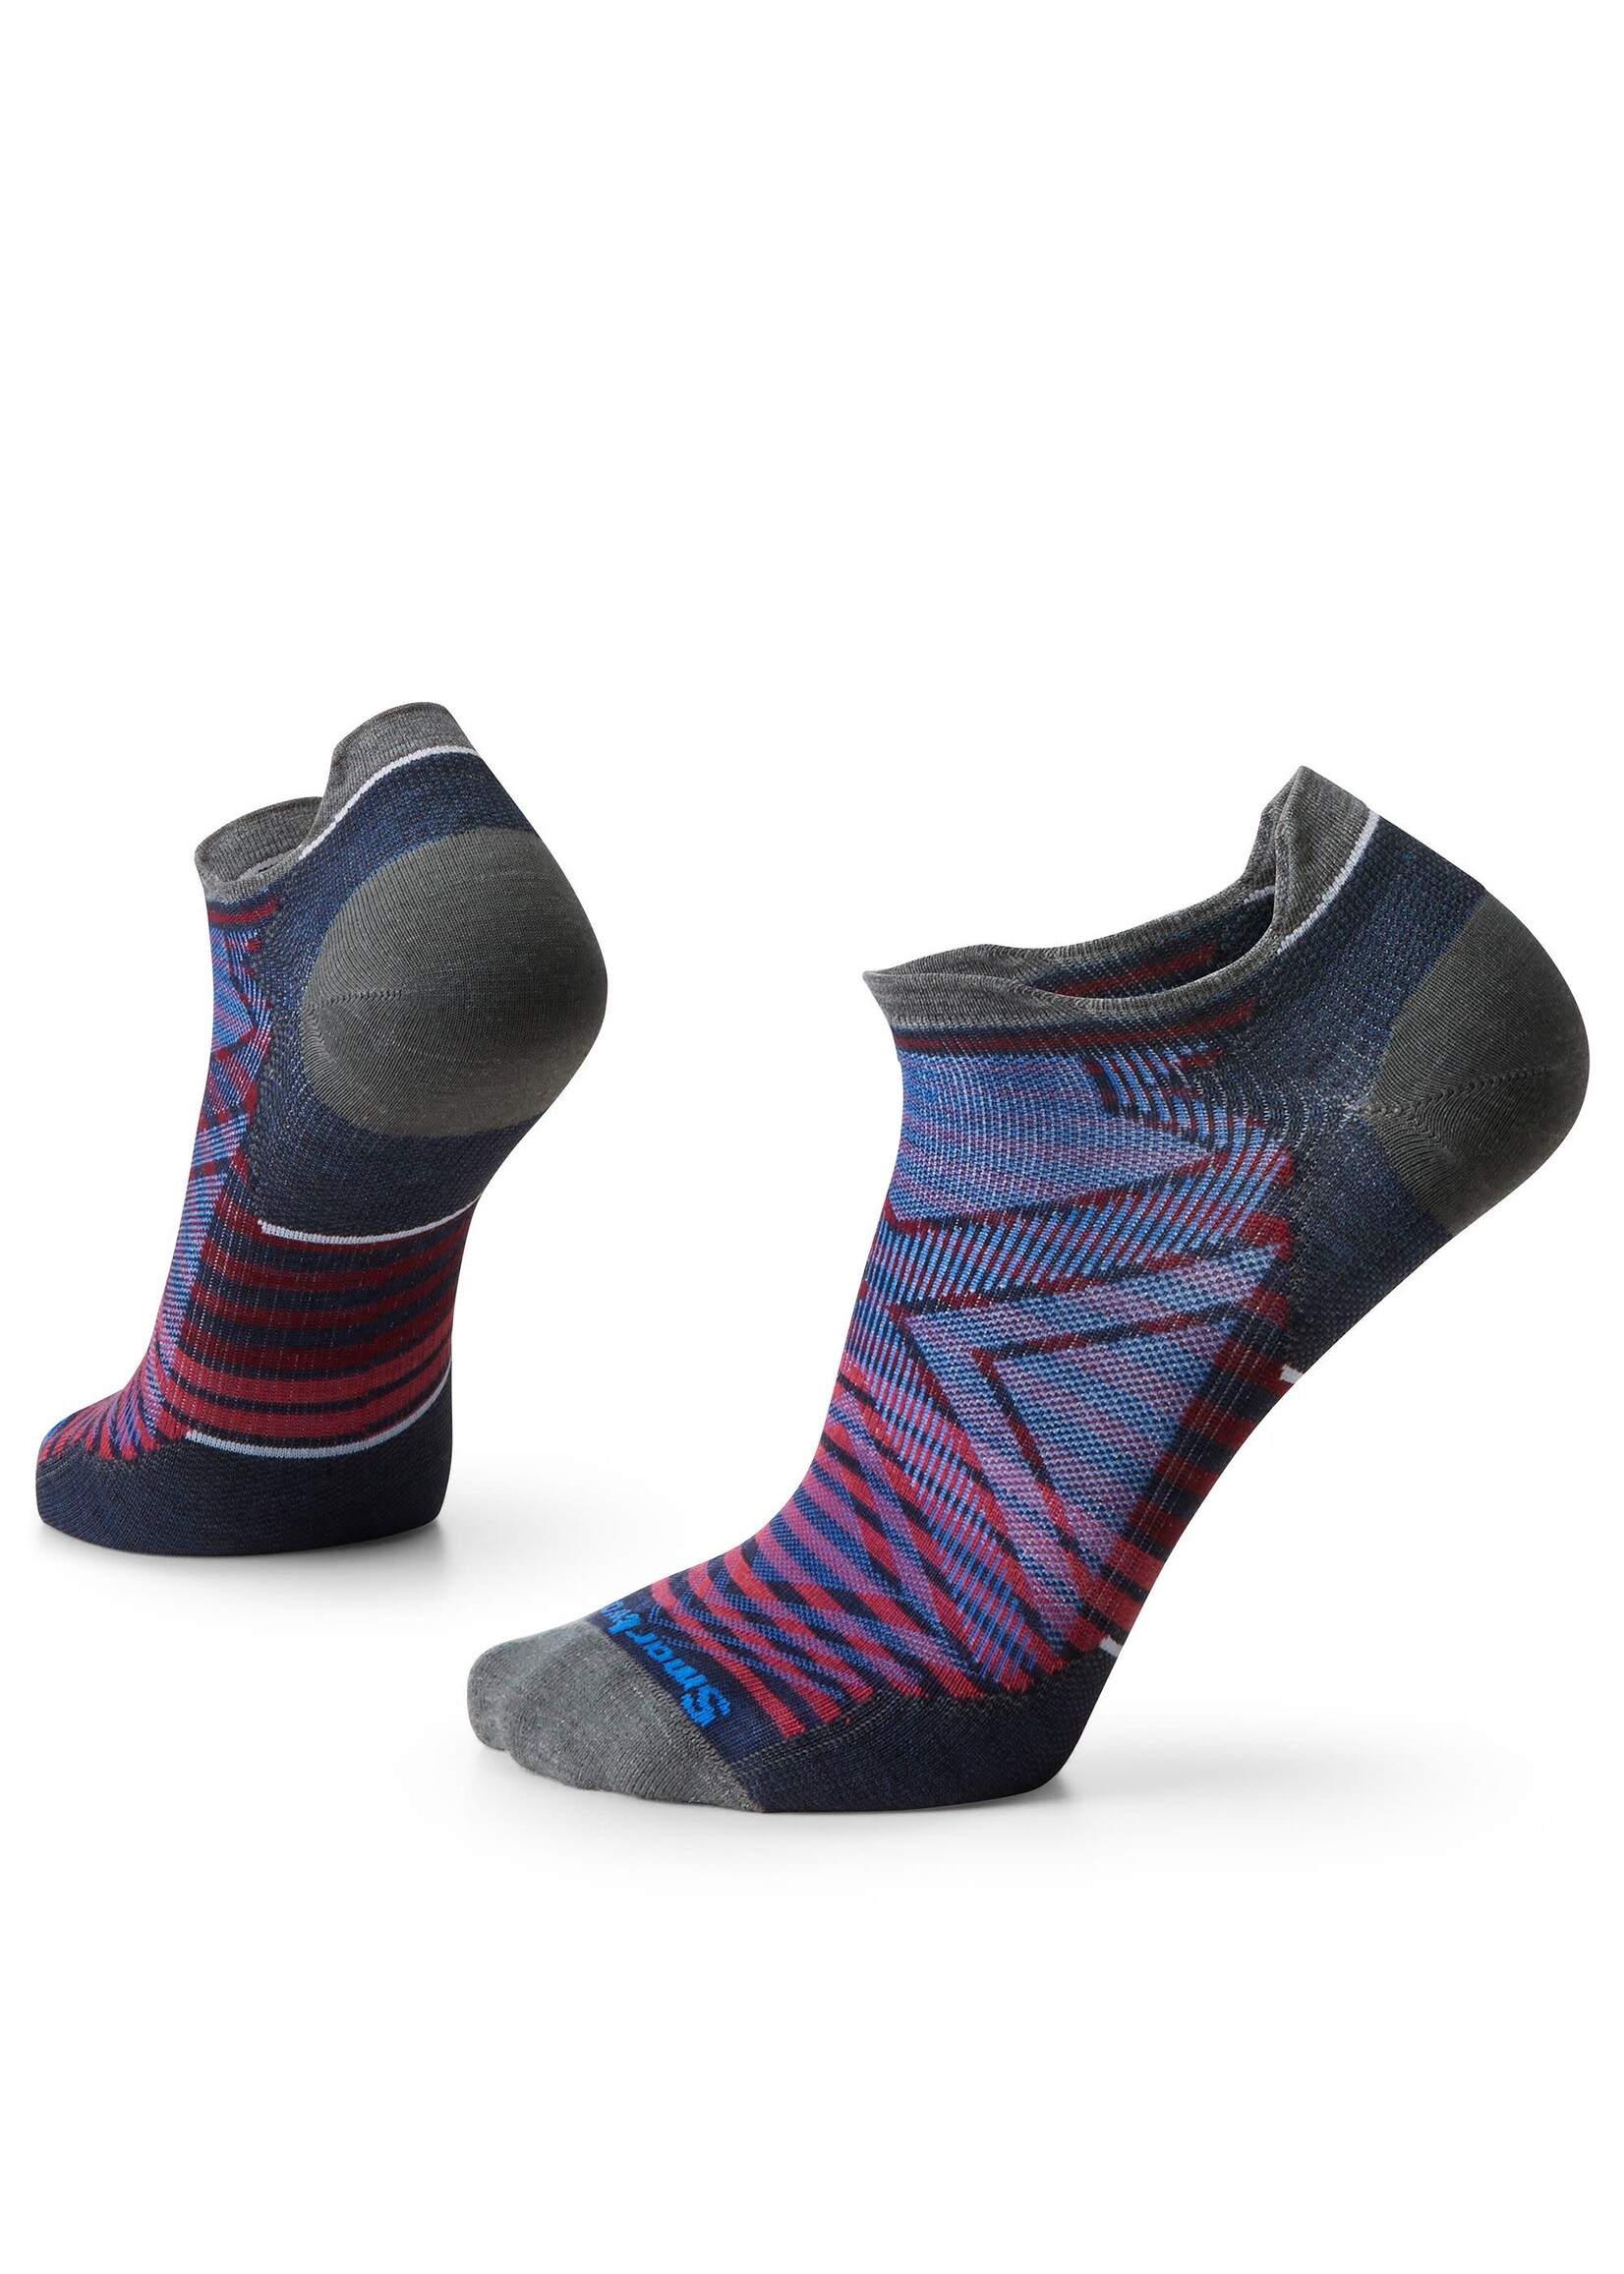 Smartwool Chaussette Smartwool Run Zero Cushion Low Ankle - Homme